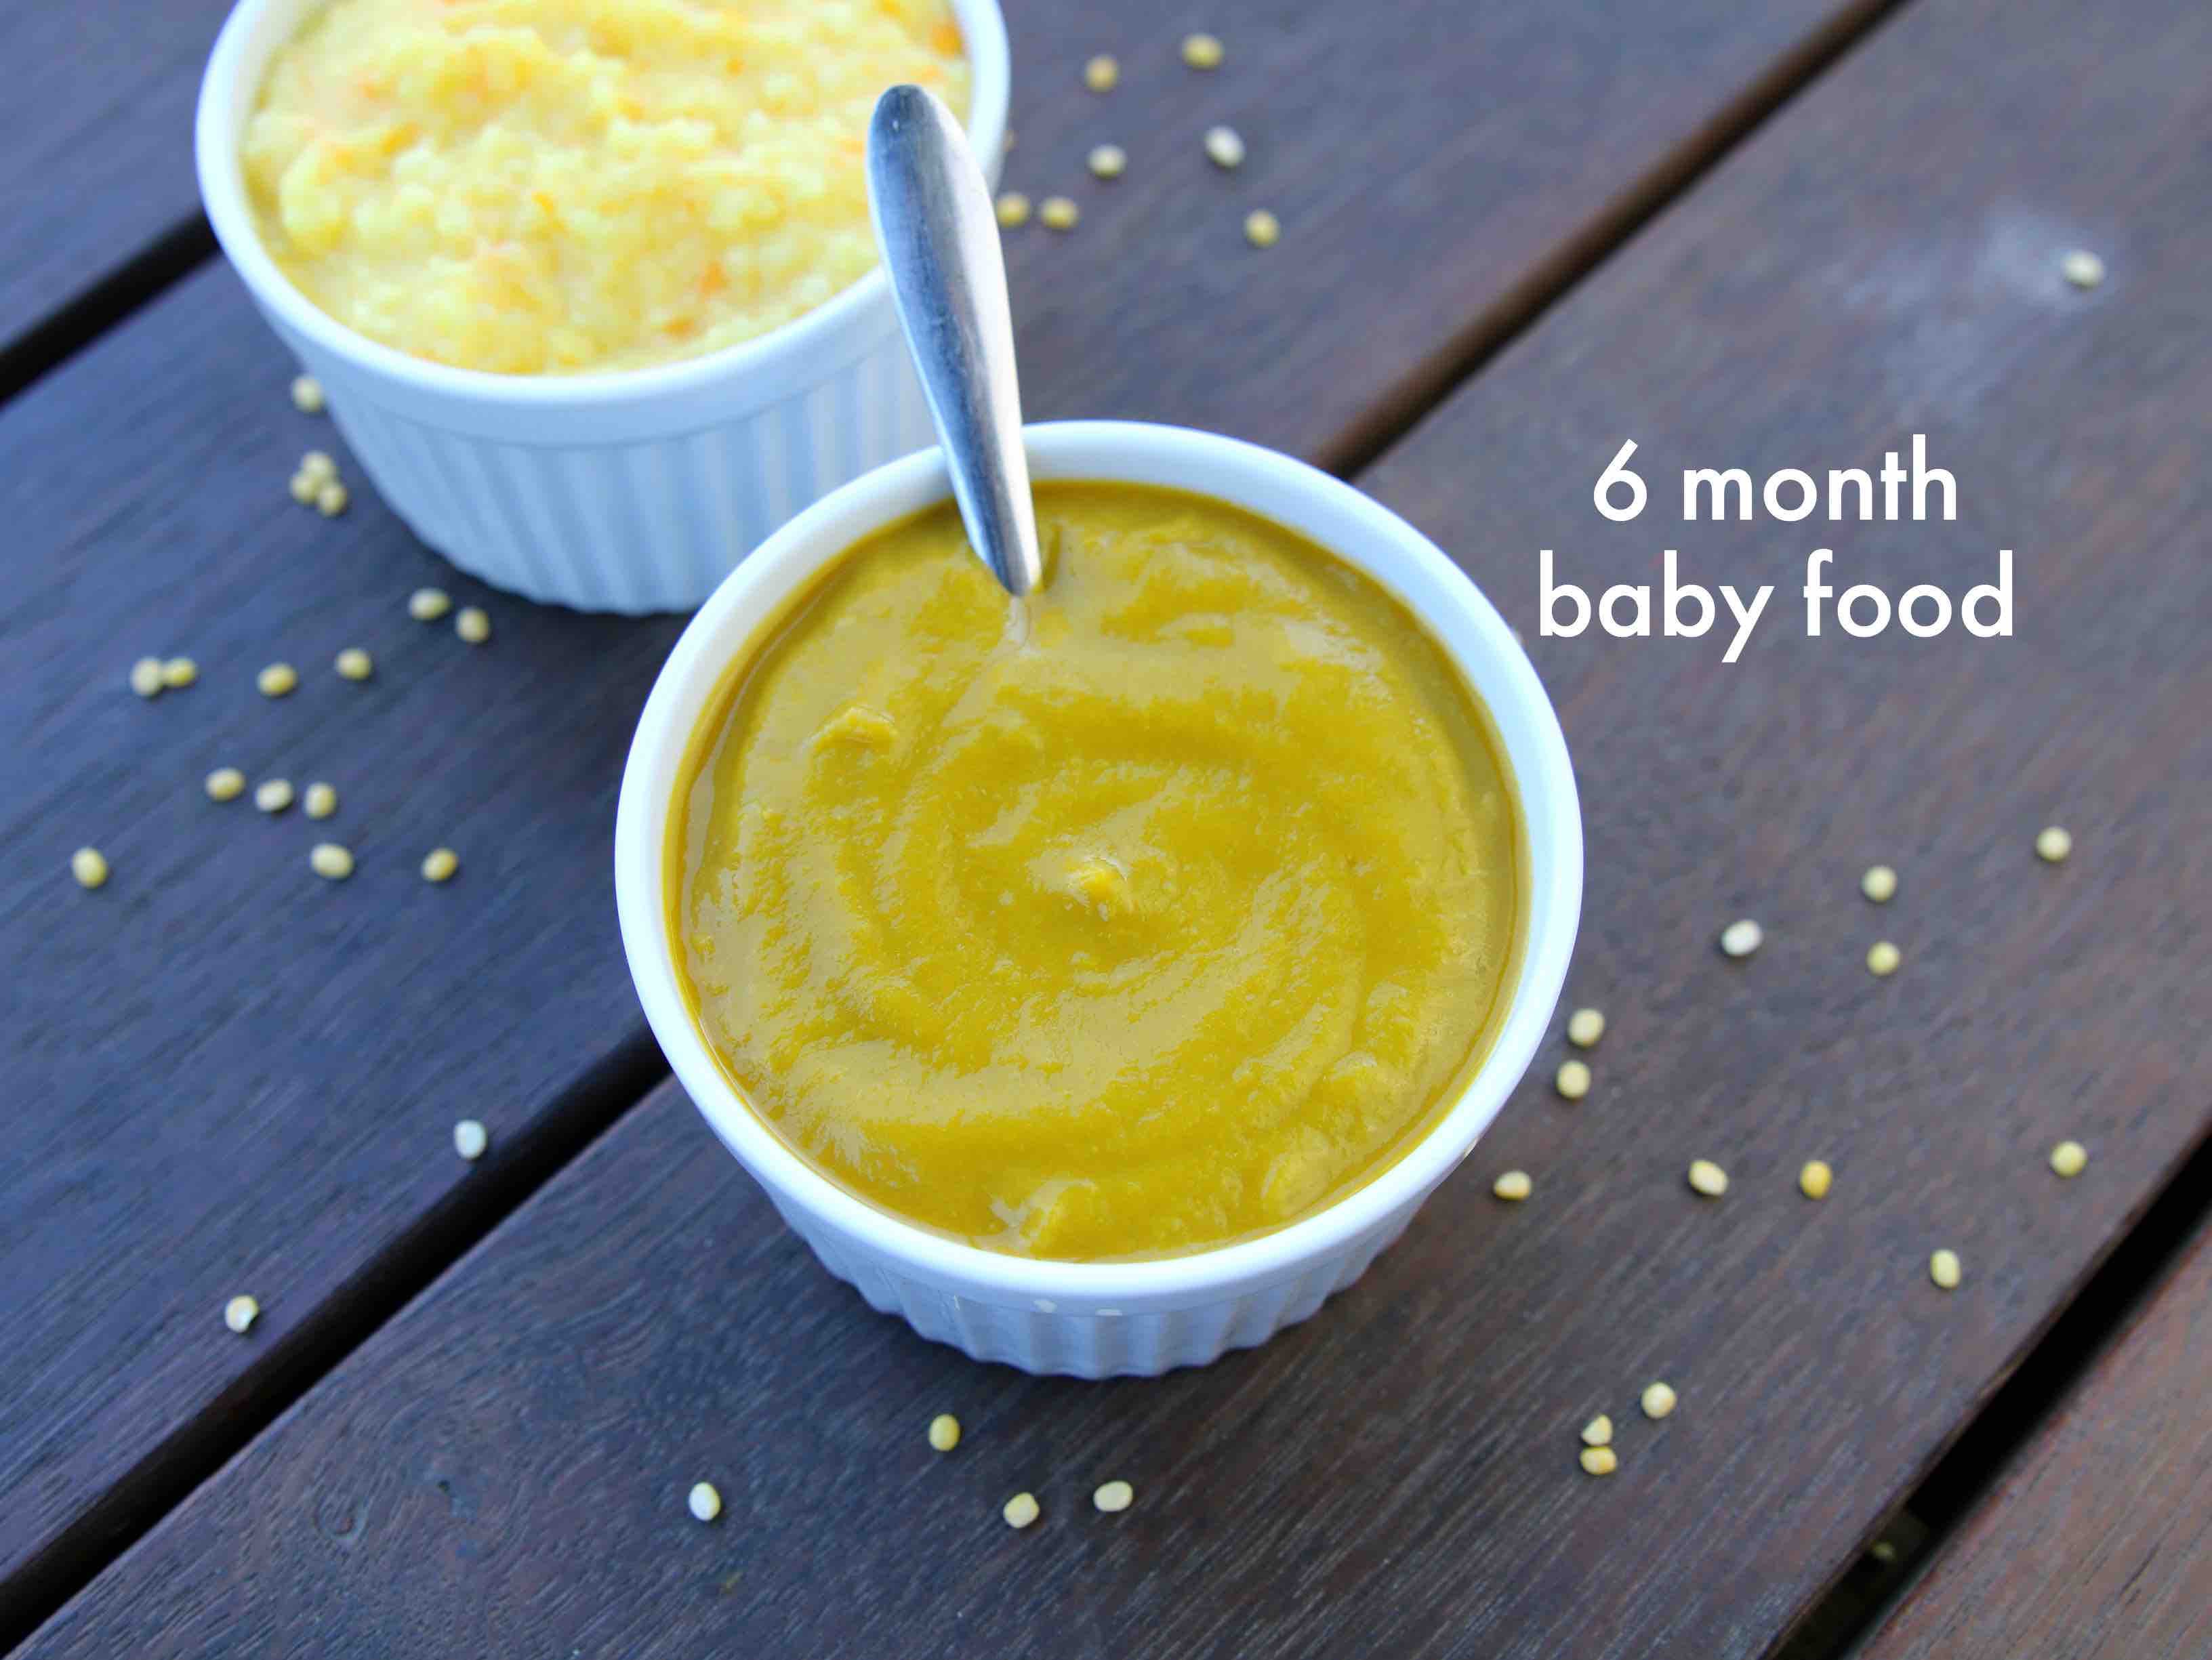 https://hebbarskitchen.com/wp-content/uploads/mainPhotos/6-month-baby-food-six-month-baby-food-baby-food-recipes-6-months-2.jpeg